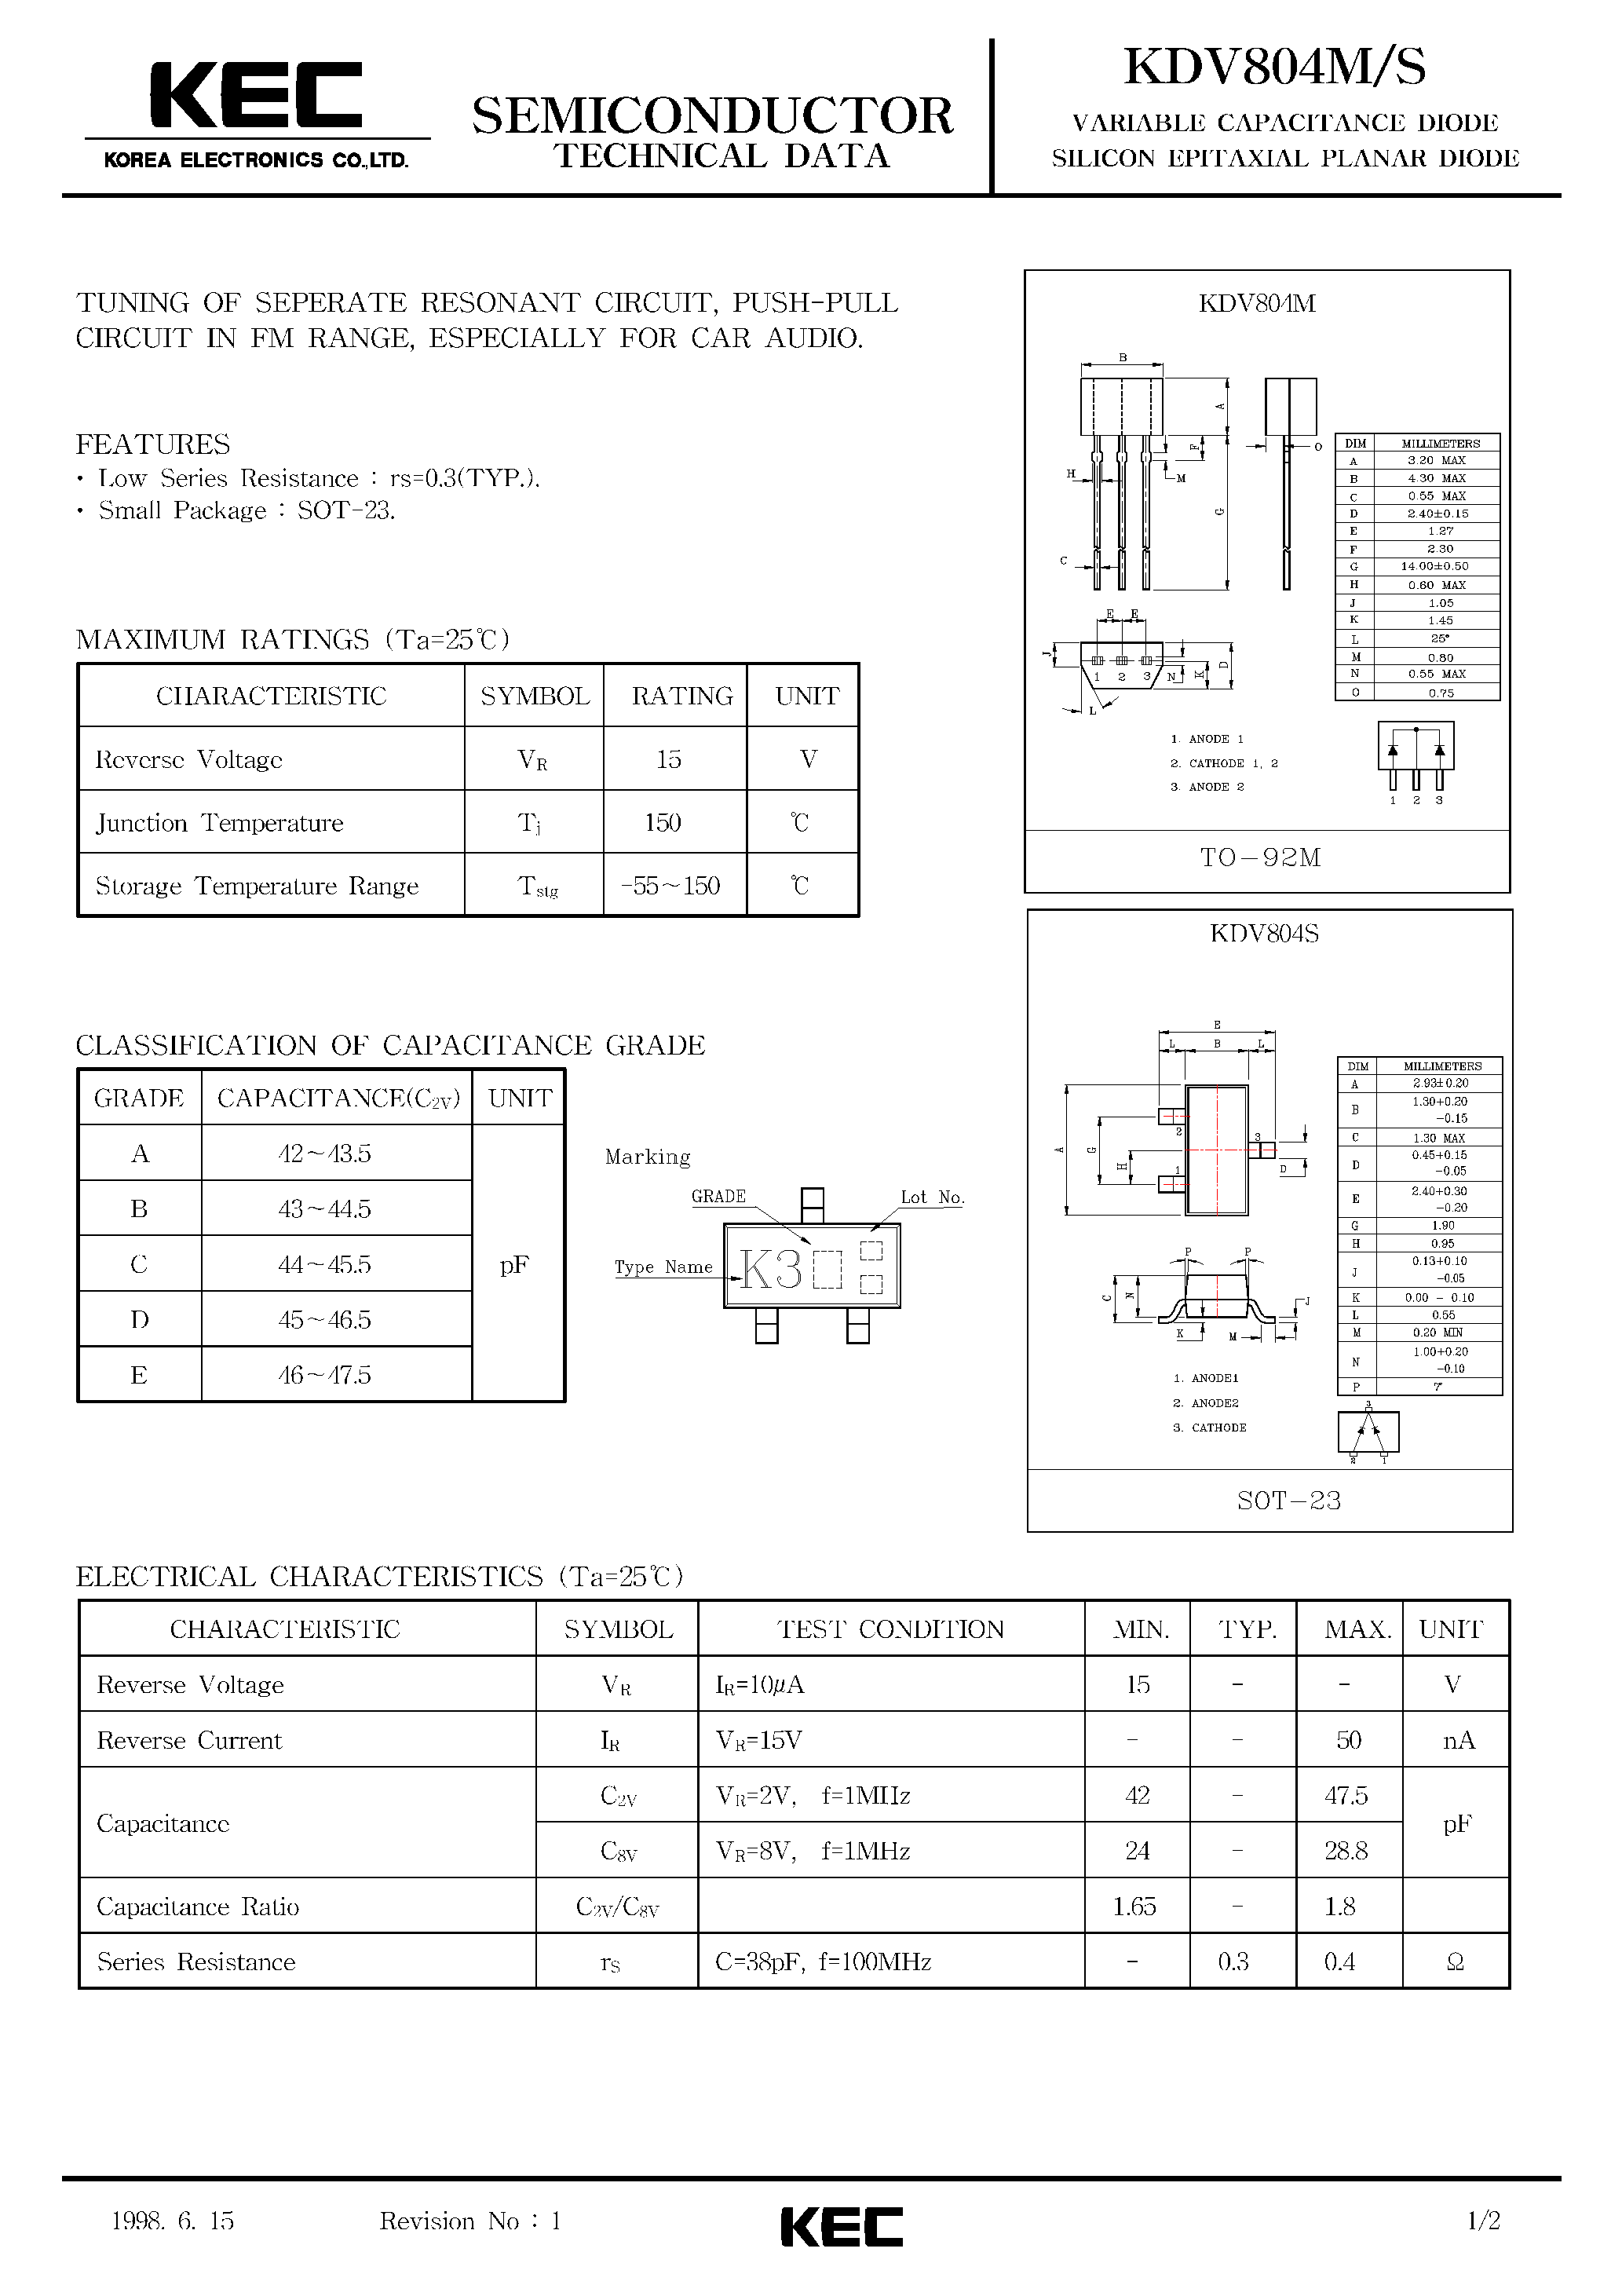 Datasheet KDV804M - VARIABLE CAPACITANCE DIODE SILICON EPITAXIAL PLANAR DIODE(TUNING OF SEPERATE RESONANT CIRCUIT) page 1